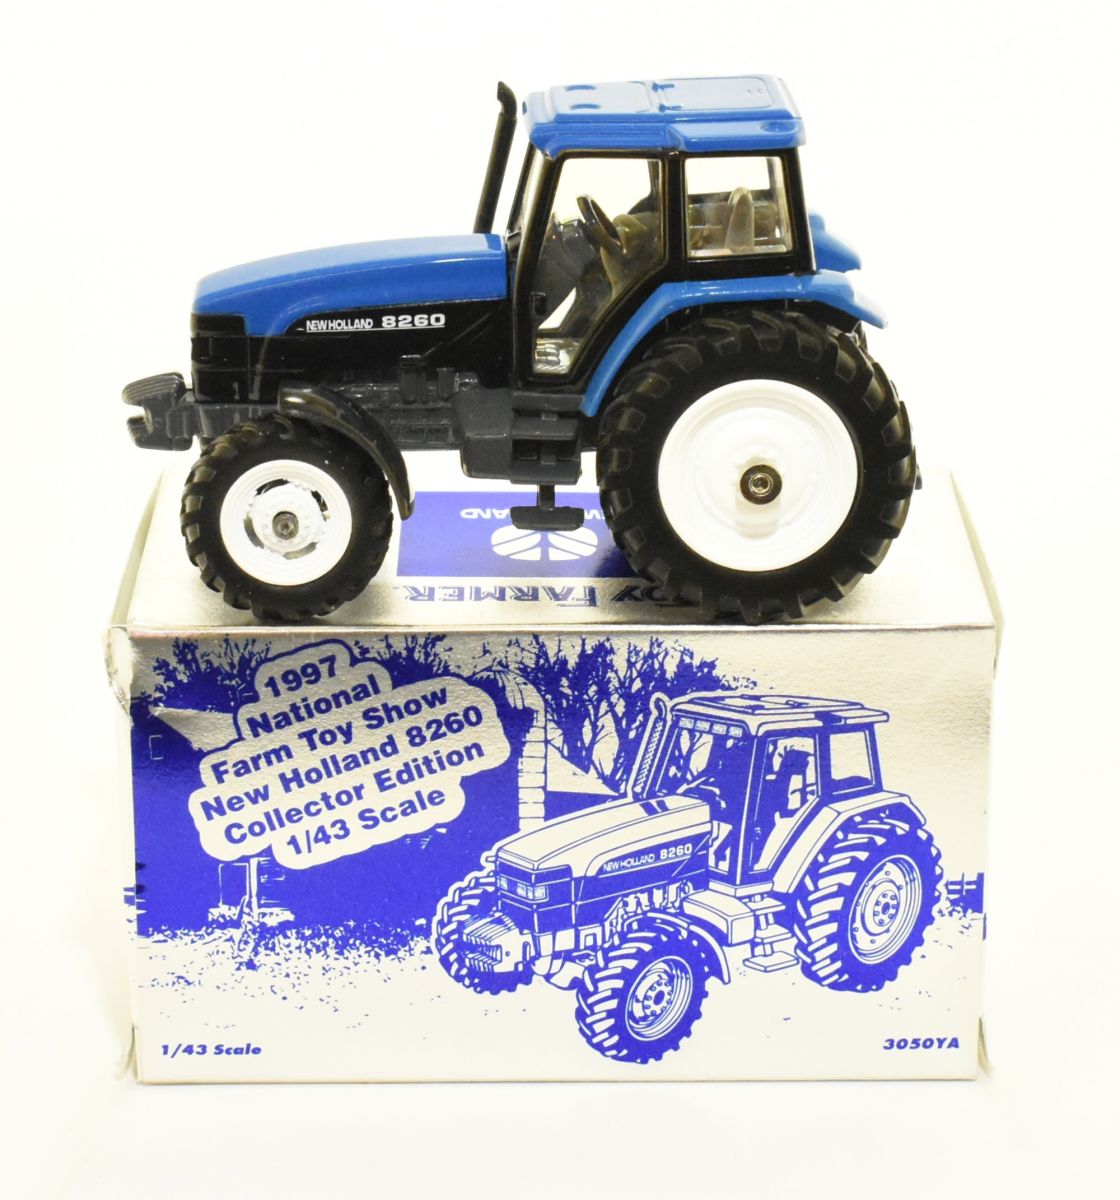 1/43 Holland 8260 Tractor With Front Wheel National Toy Show Collector Edition - Daltons Farm Toys